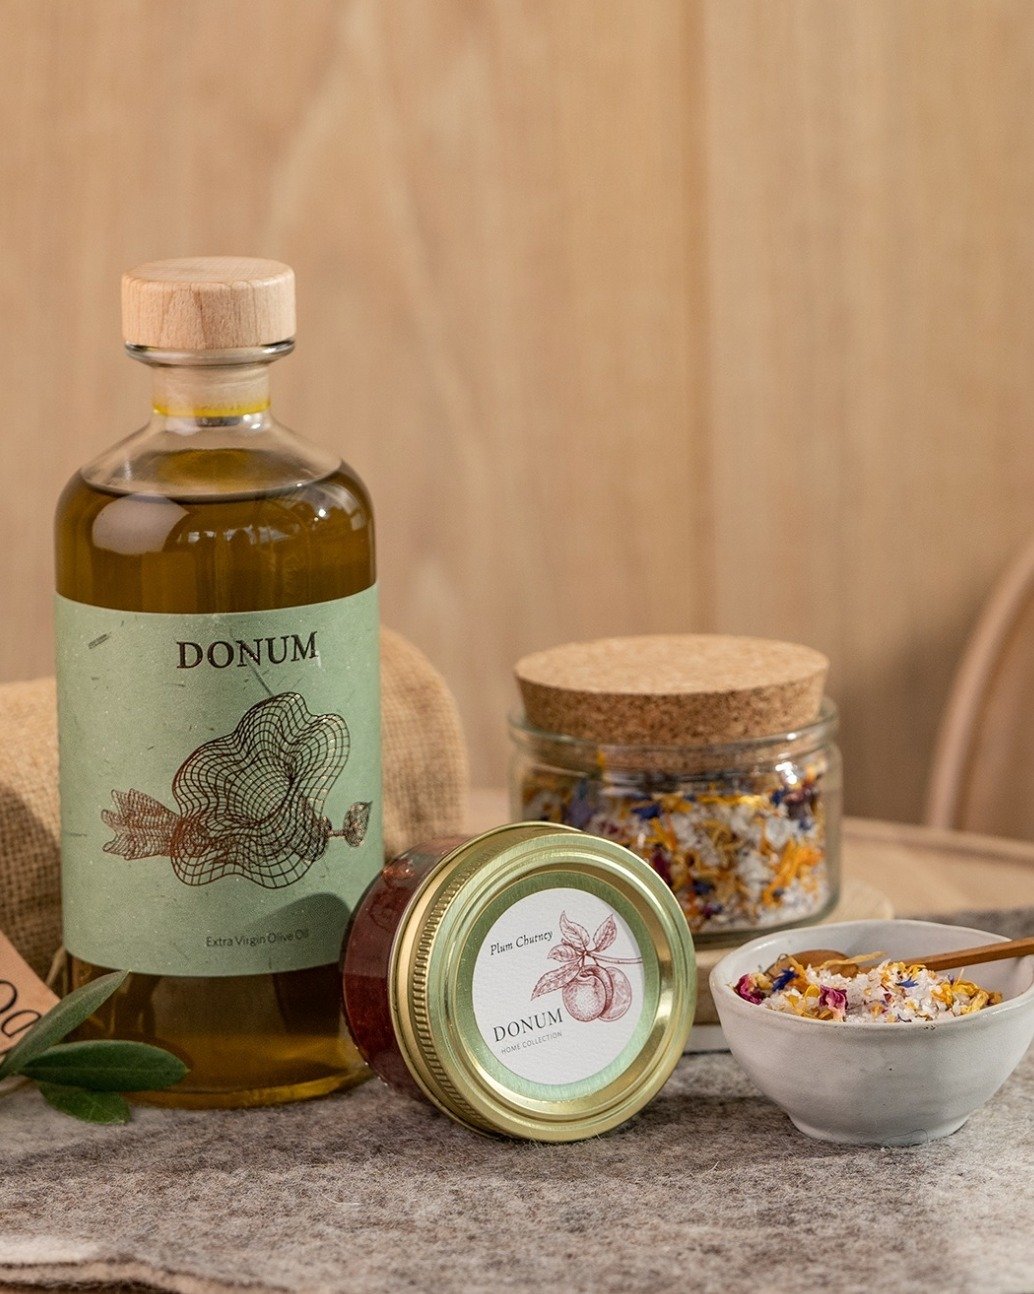 Enhance your culinary creations this spring with @donumestate's Carneros Culinary Gift Set. ⁠
⁠
Including their floral finishing salt, Estate Olive Oil and a jar of their Estate Plum Chutney, this set is guaranteed to elevate any seasonal dish.⁠
⁠
To